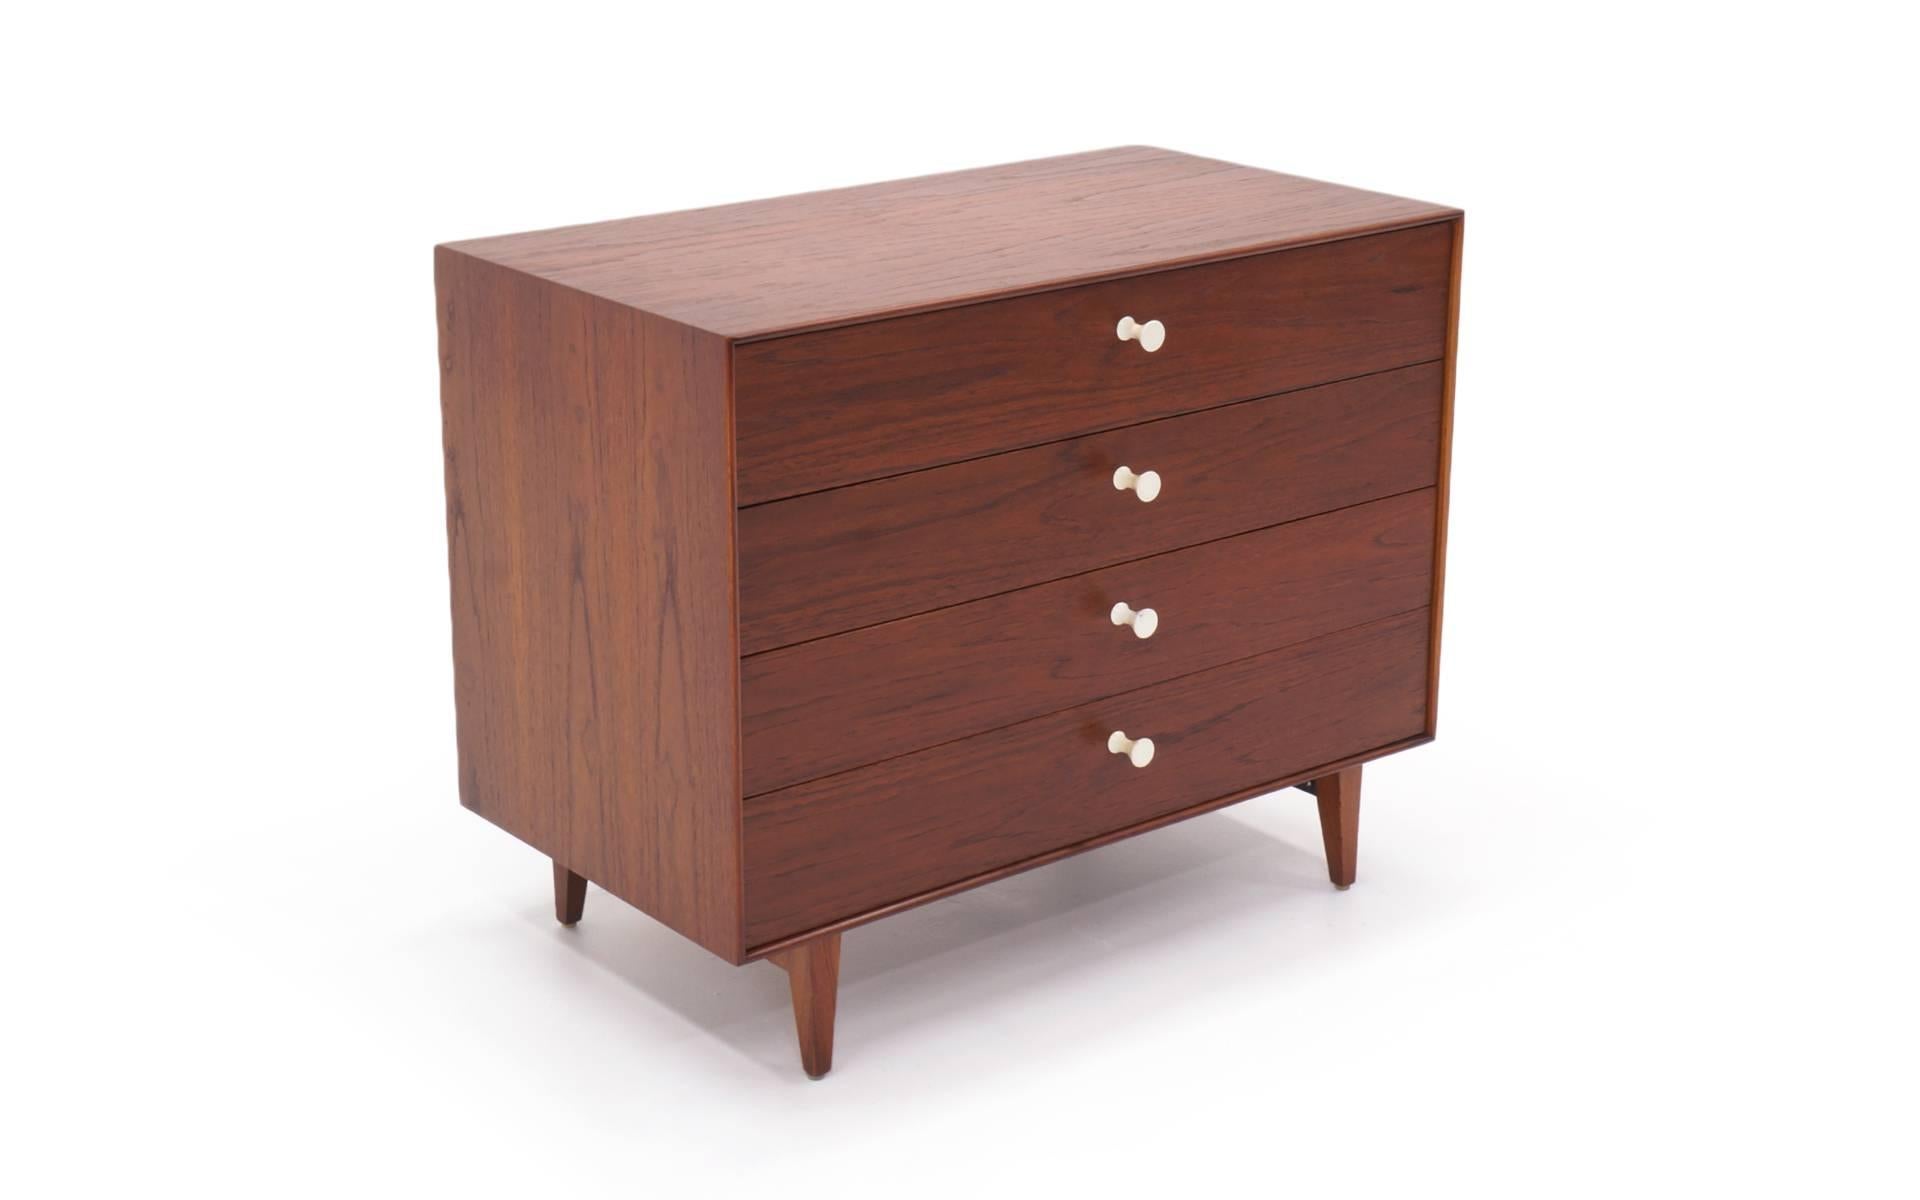 Rosewood thin edge cabinet designed by George Nelson for Herman Miller. Original porcelain pulls.